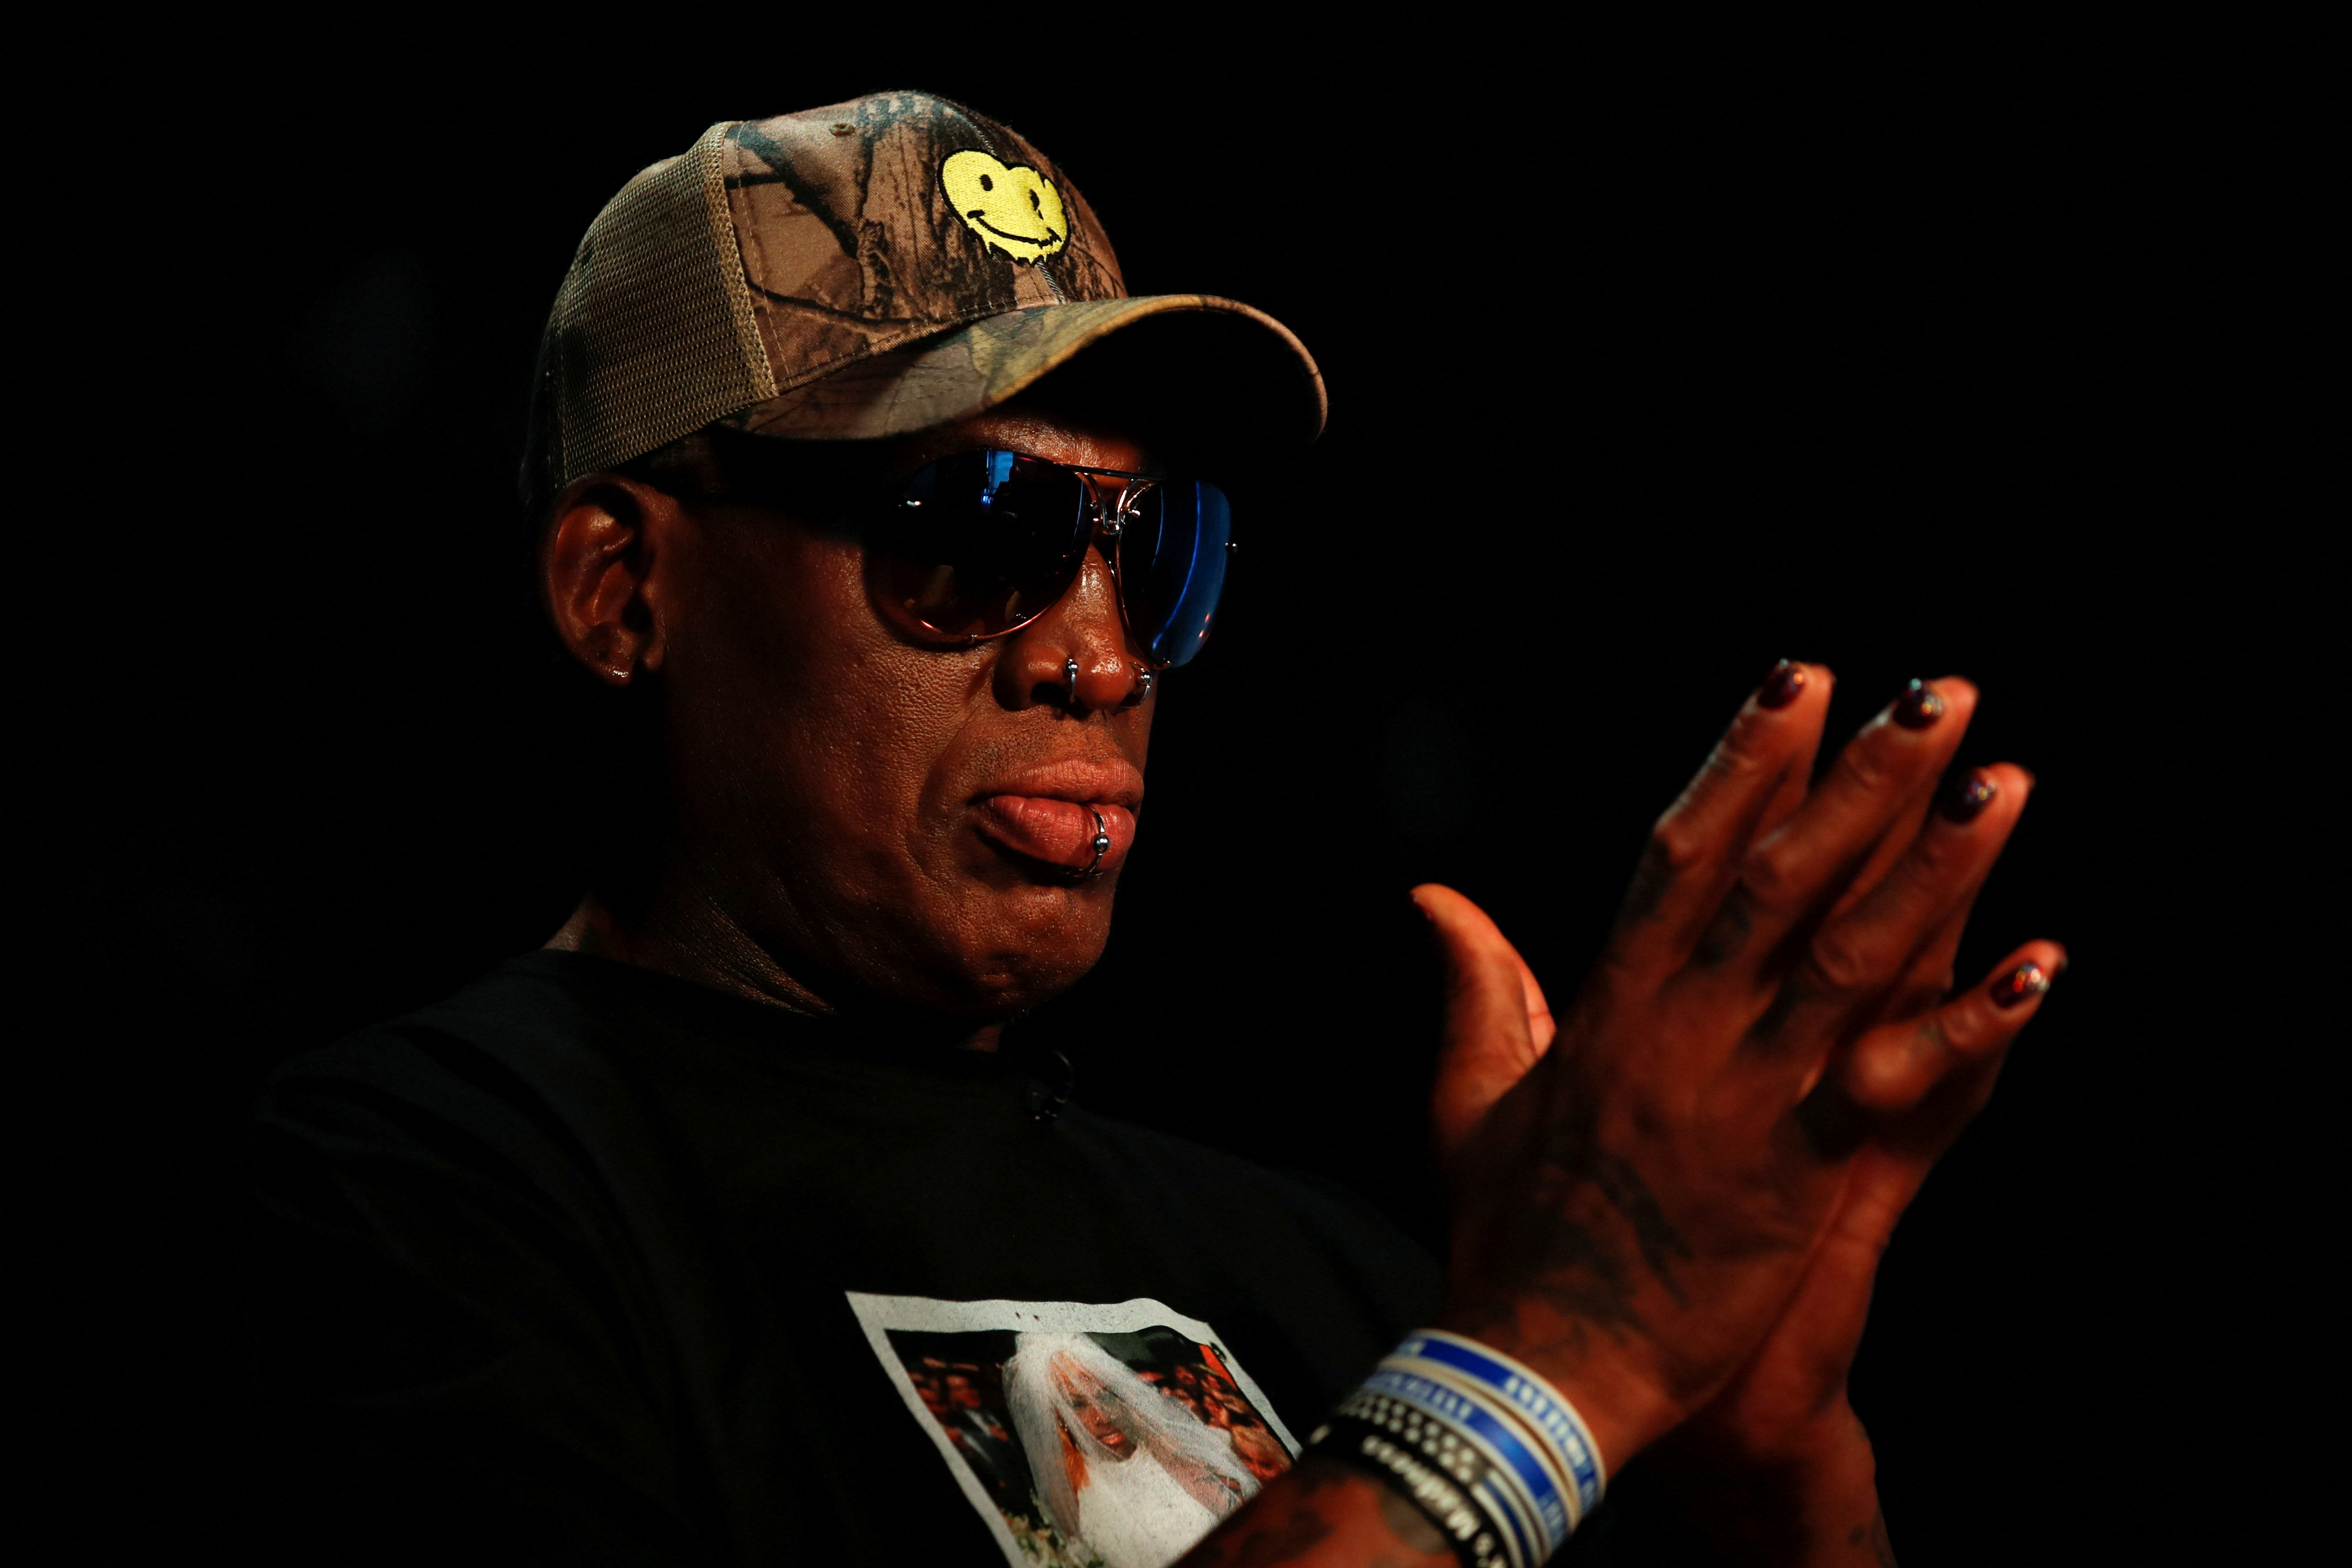 Former NBA player Dennis Rodman poses for a portrait in Los Angeles